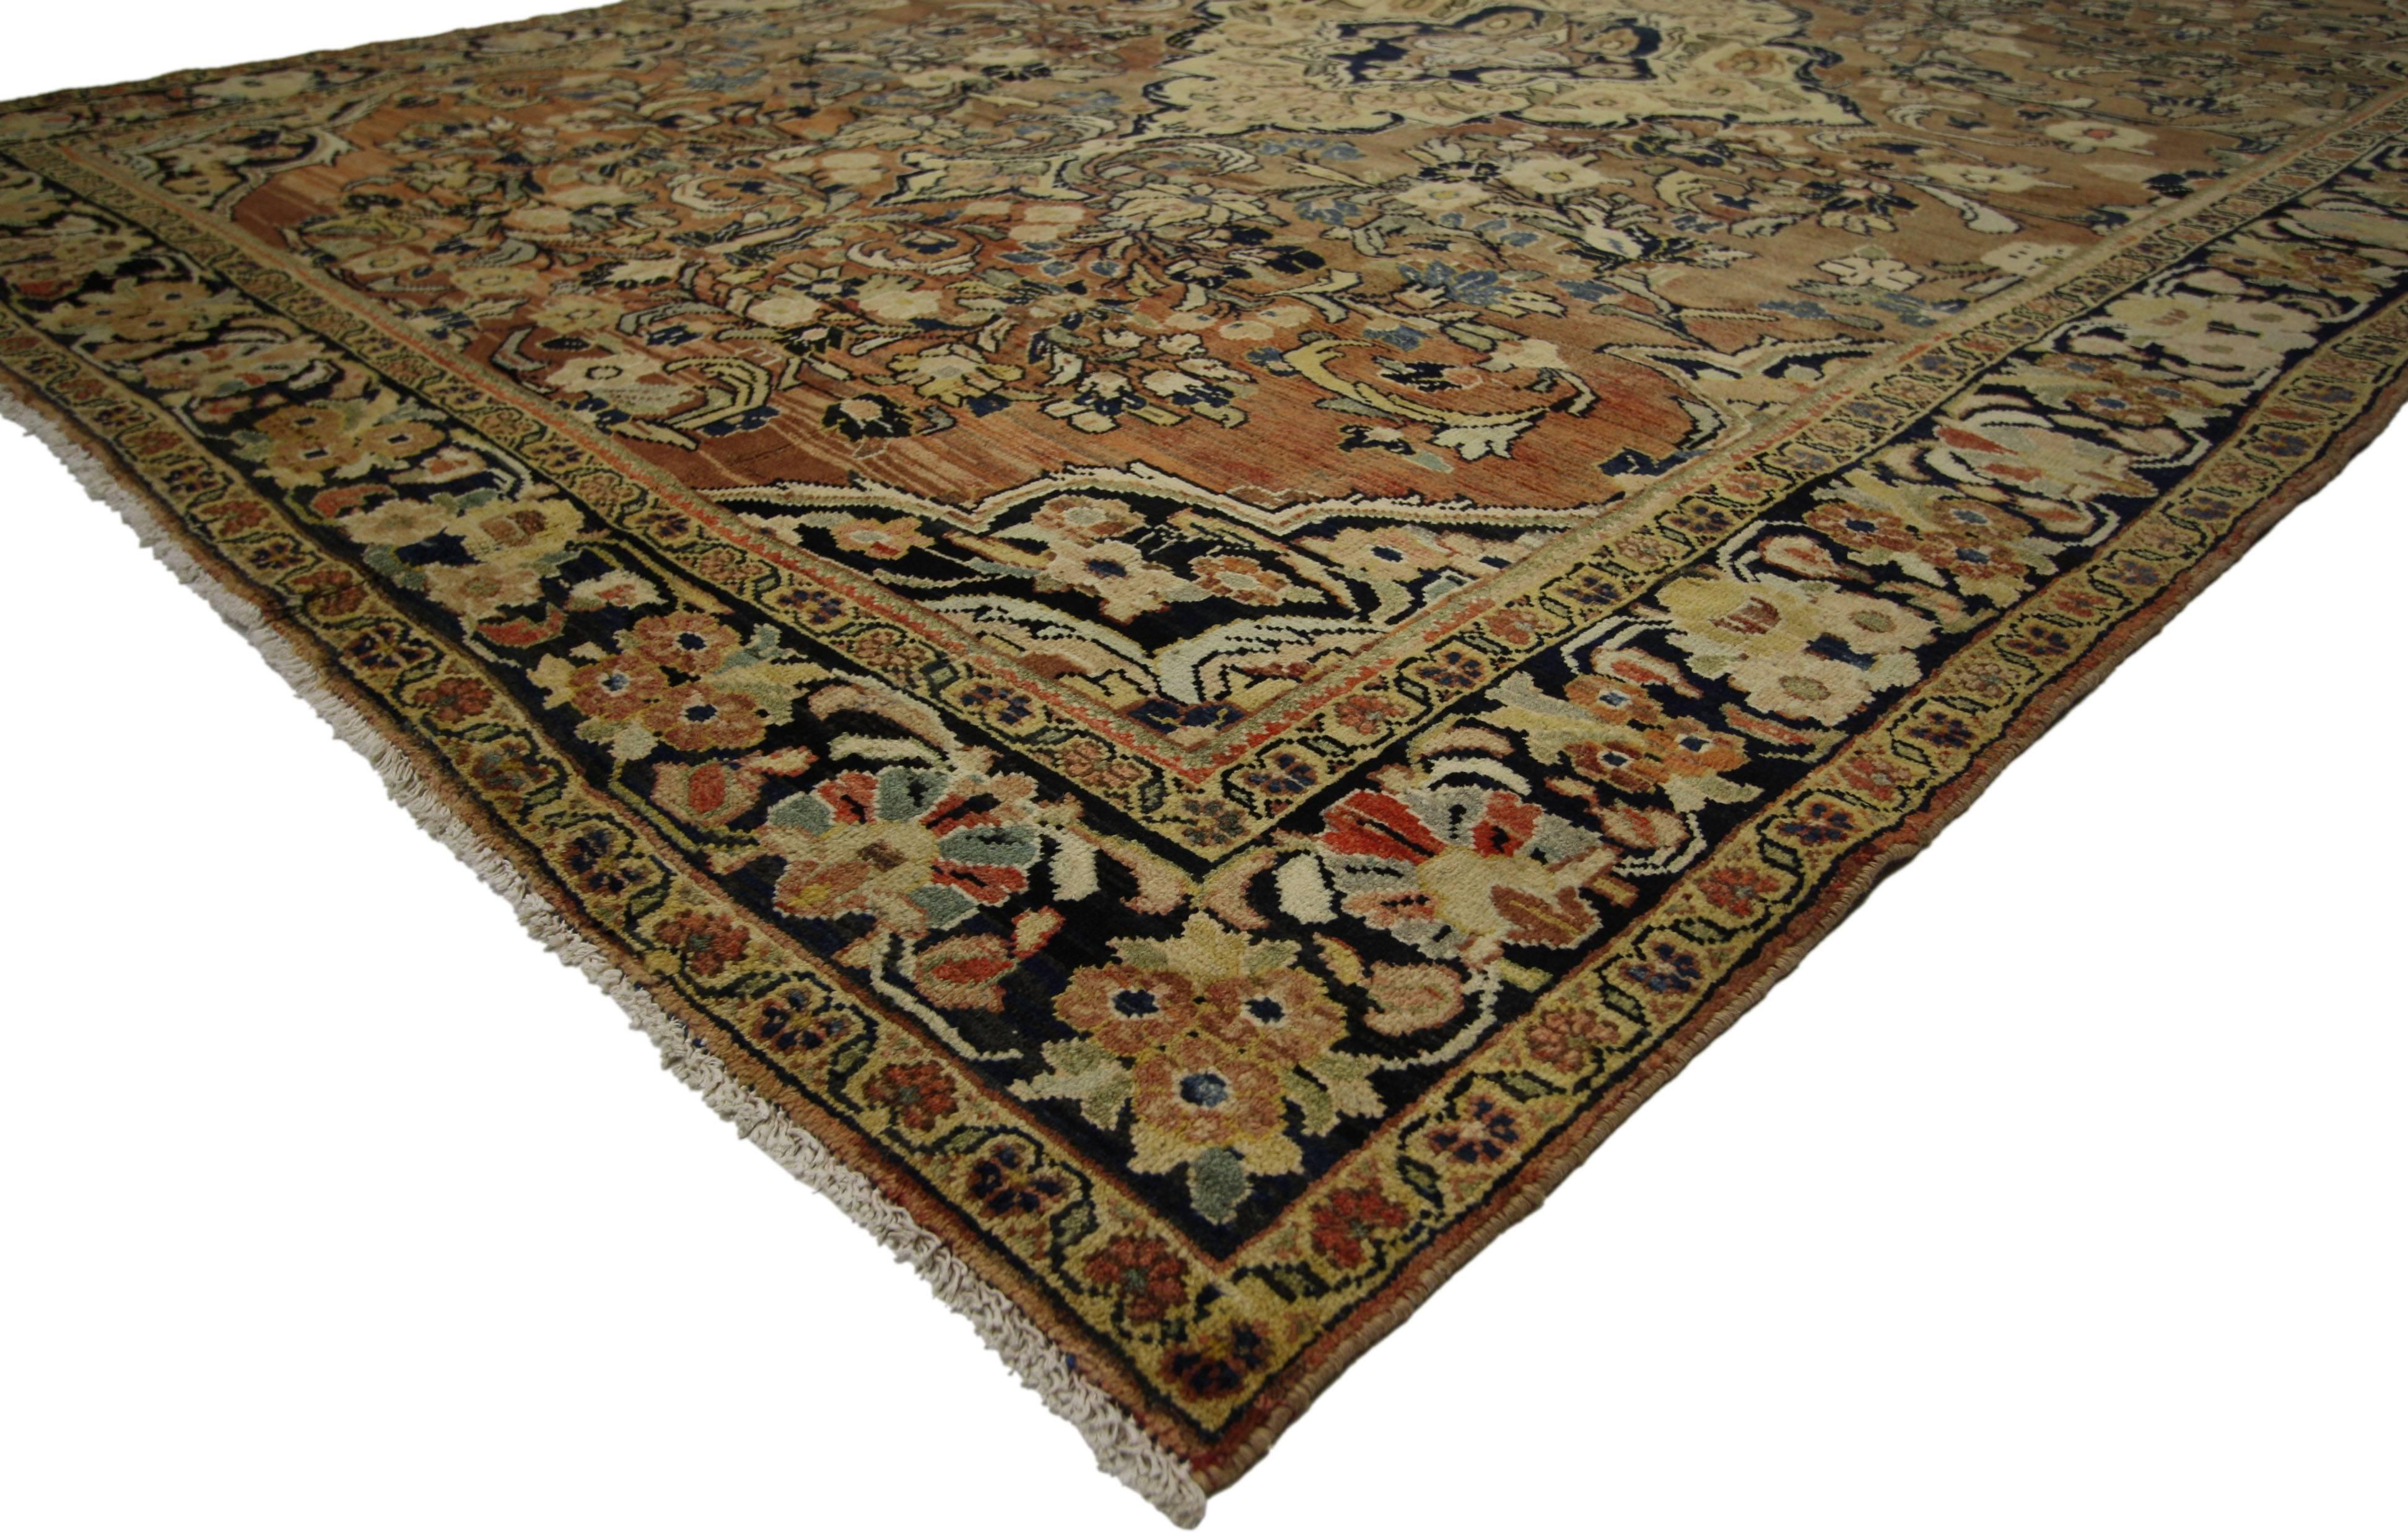 76321 Vintage Persian Mahal Rug with Warm Colors and Victorian Style 07'09 X 10'07. This hand knotted wool vintage Persian Mahal rug features a cusped centre medallion surrounded by an all-over floral pattern composed of blooming palmettes, curled